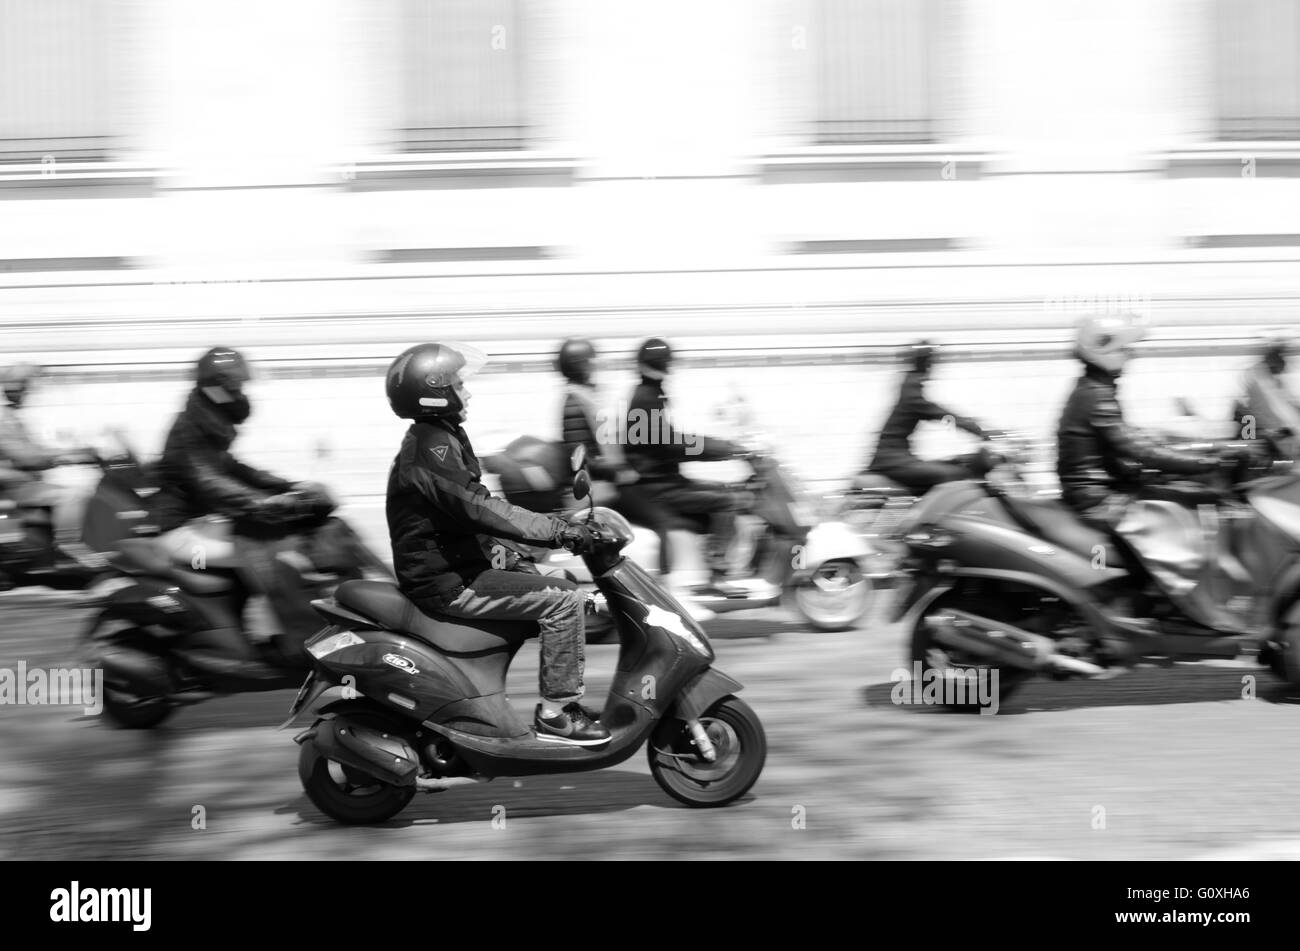 Fast mopeds/scooters in traffic Stock Photo